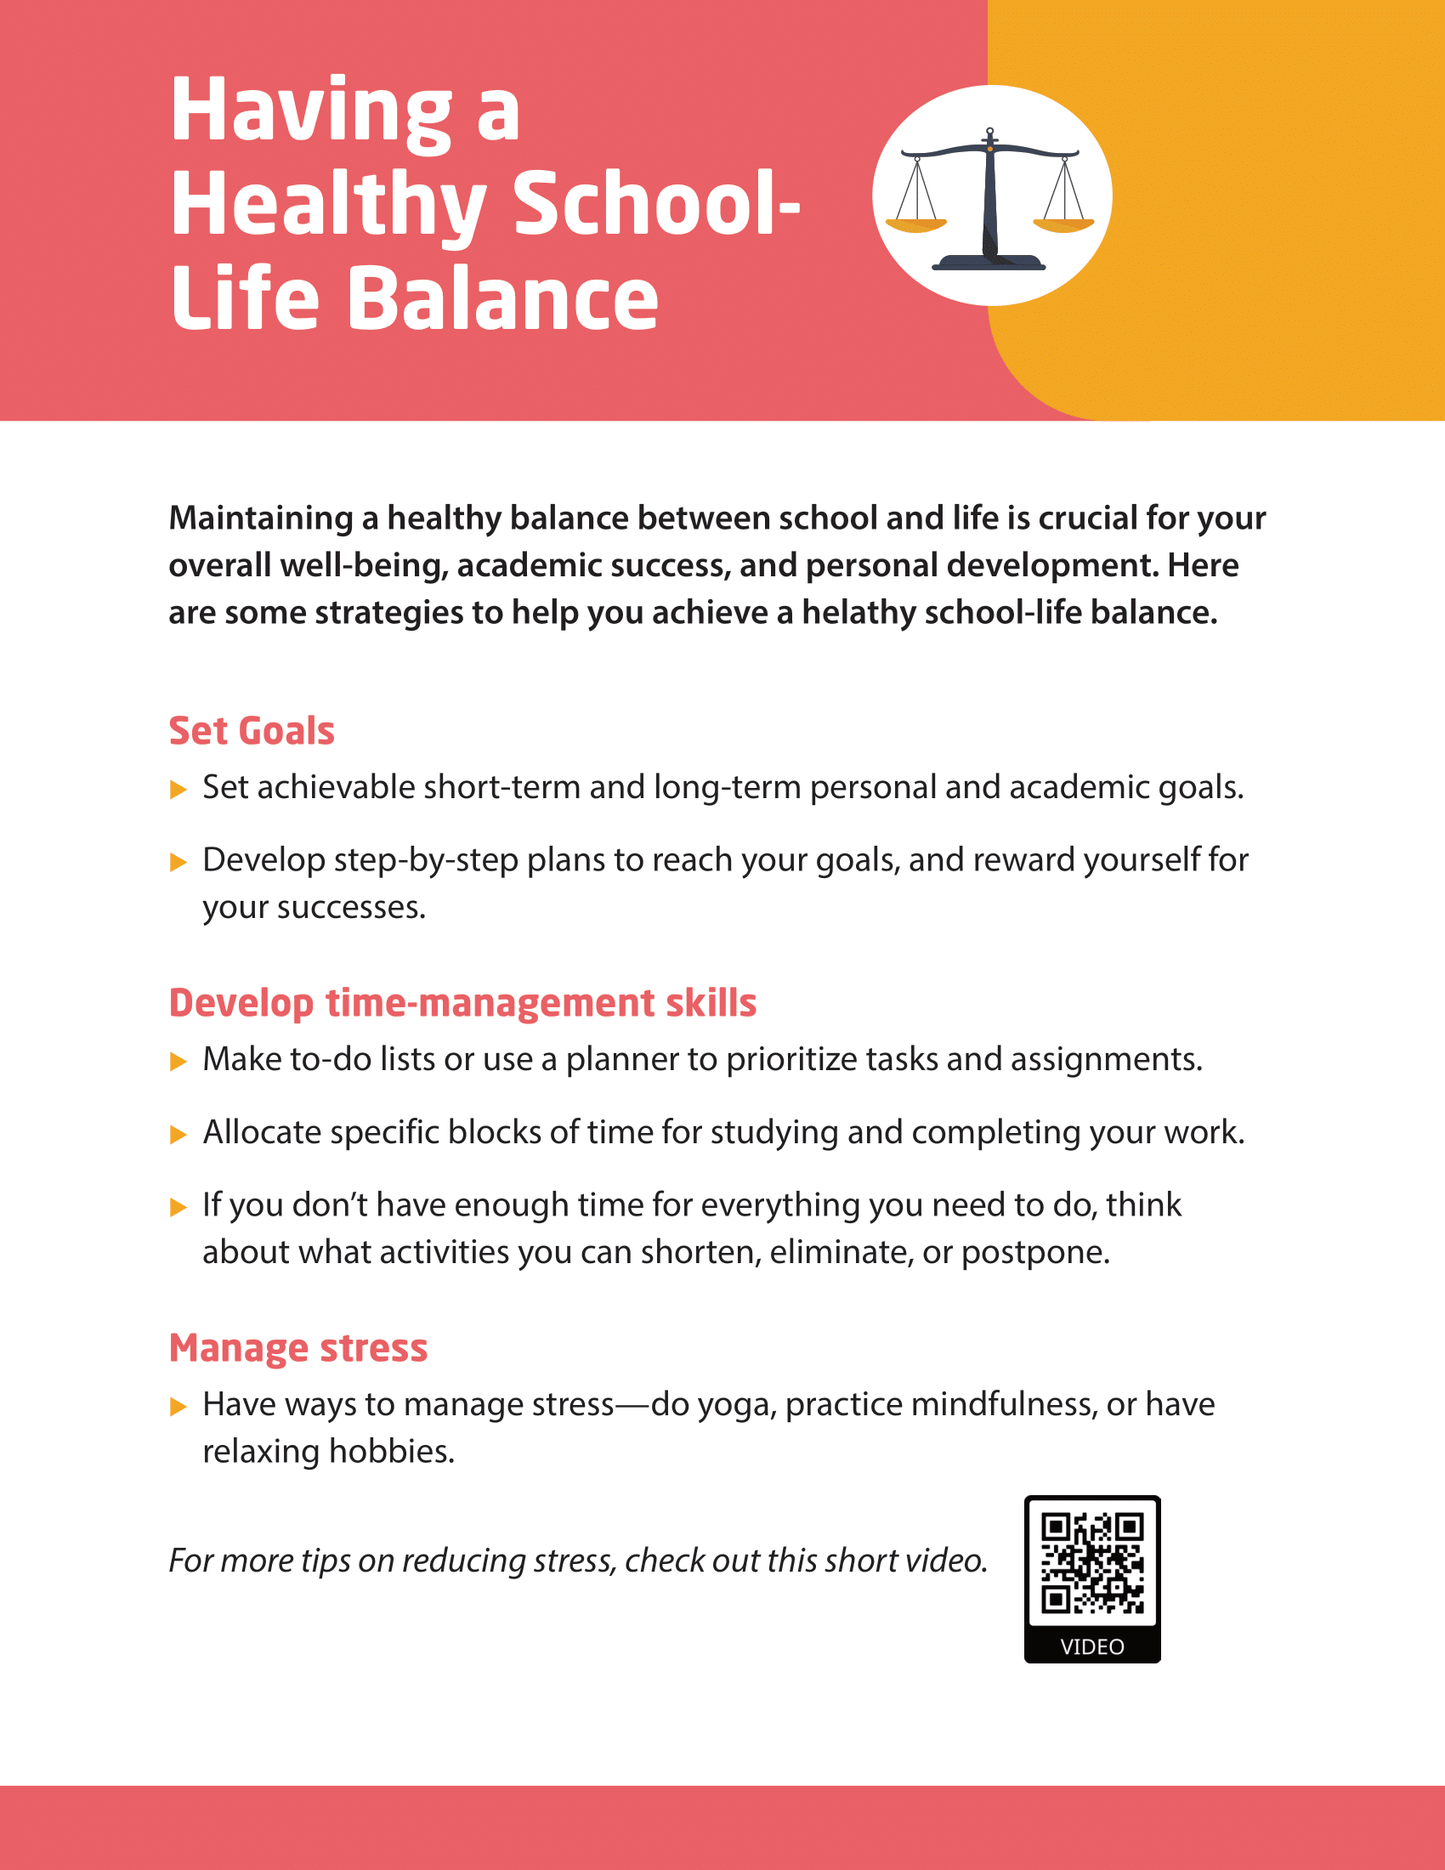 Having a Healthy School-Life Balance - Information for Students